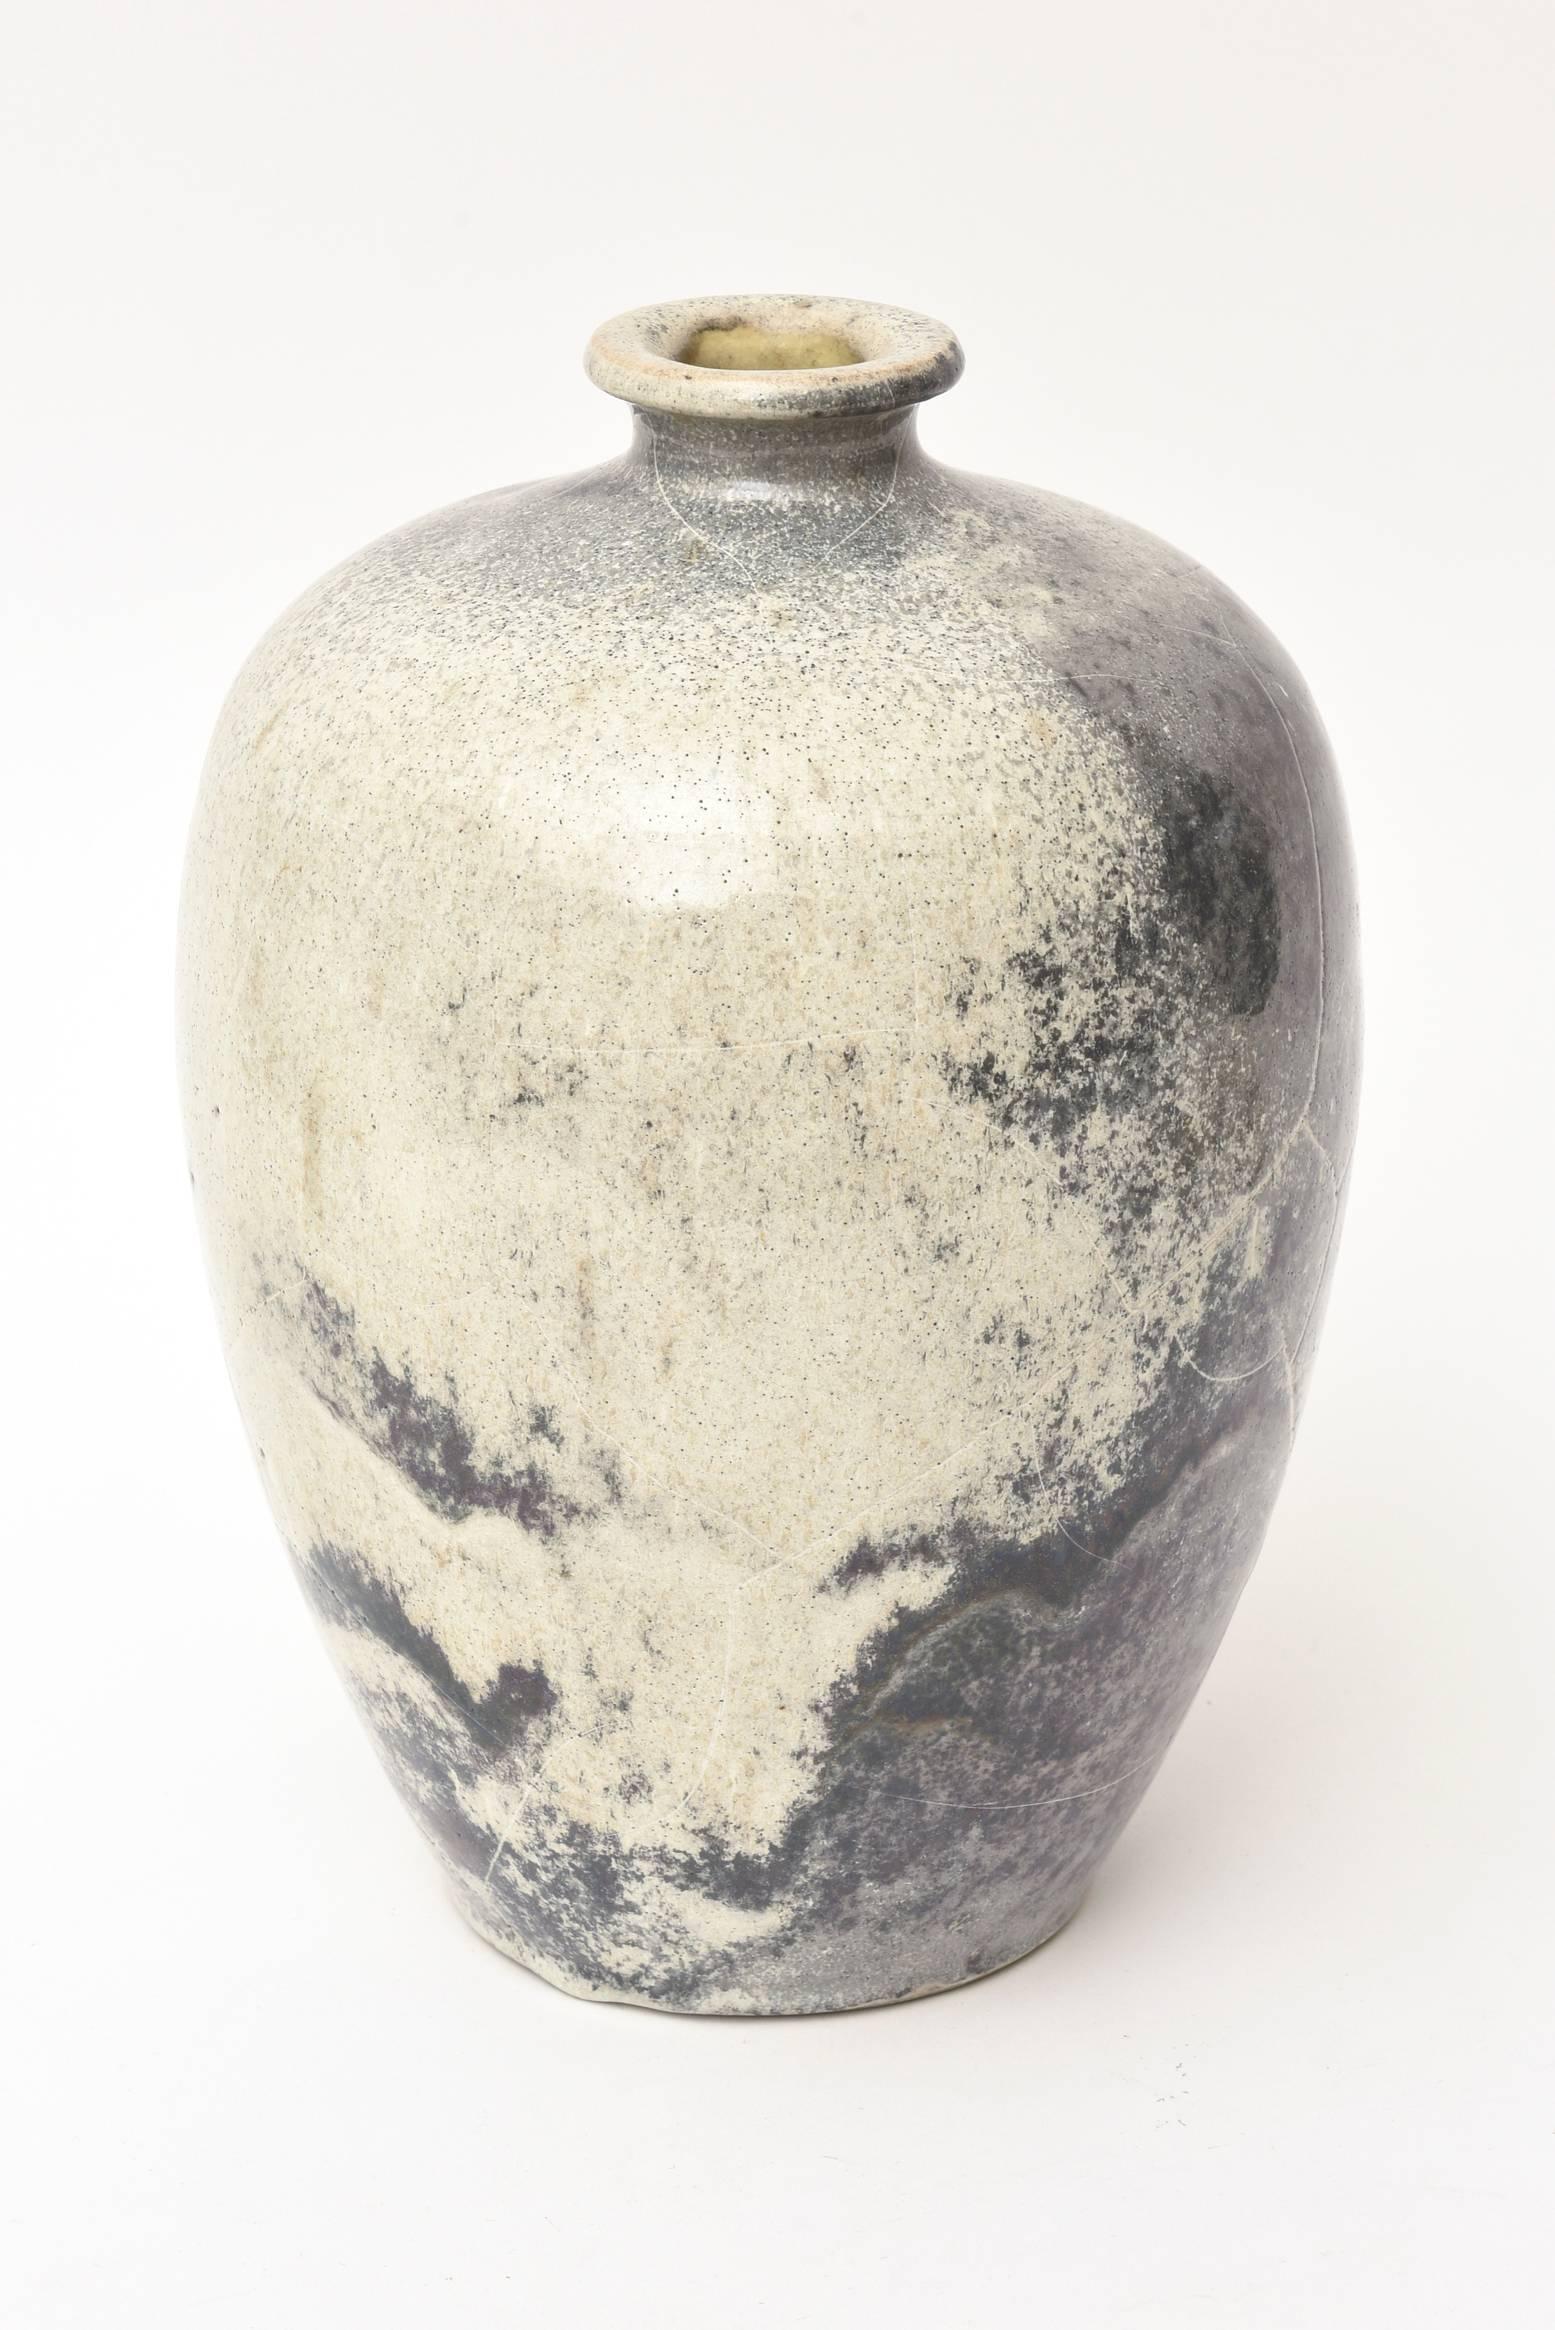 This modernist Mid-Century ceramic vase or vessel that is West German has partial labels on it that say Kunsta with parentheses. We are still doing the research. This is a beauty.
The mottled coloring of gray and off white and design now is very